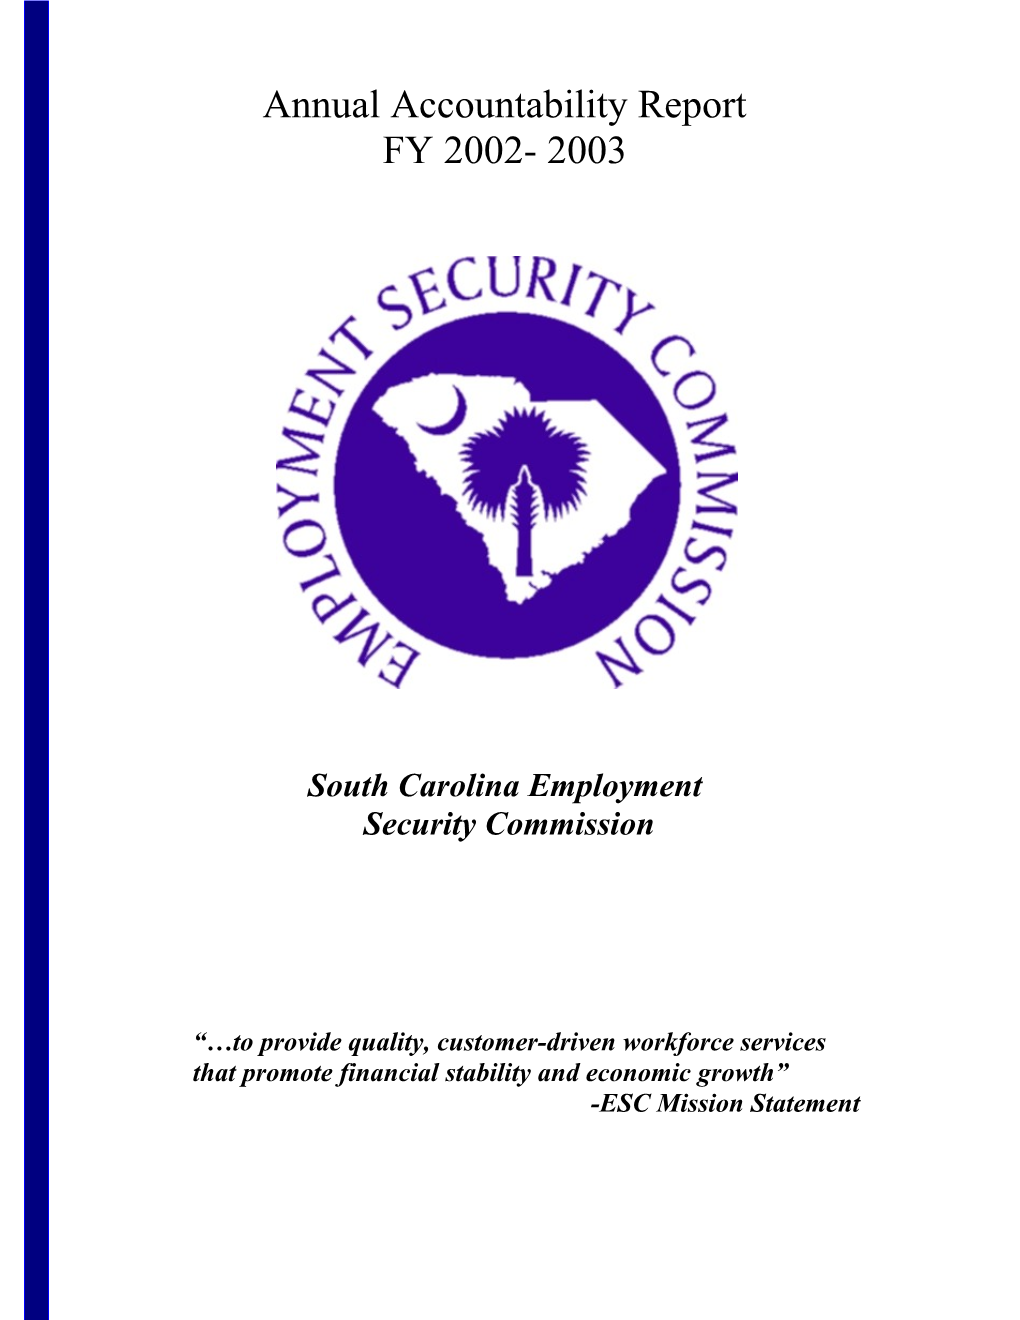 South Carolina Employment Security Commission Accountability Report 2002 - 2003